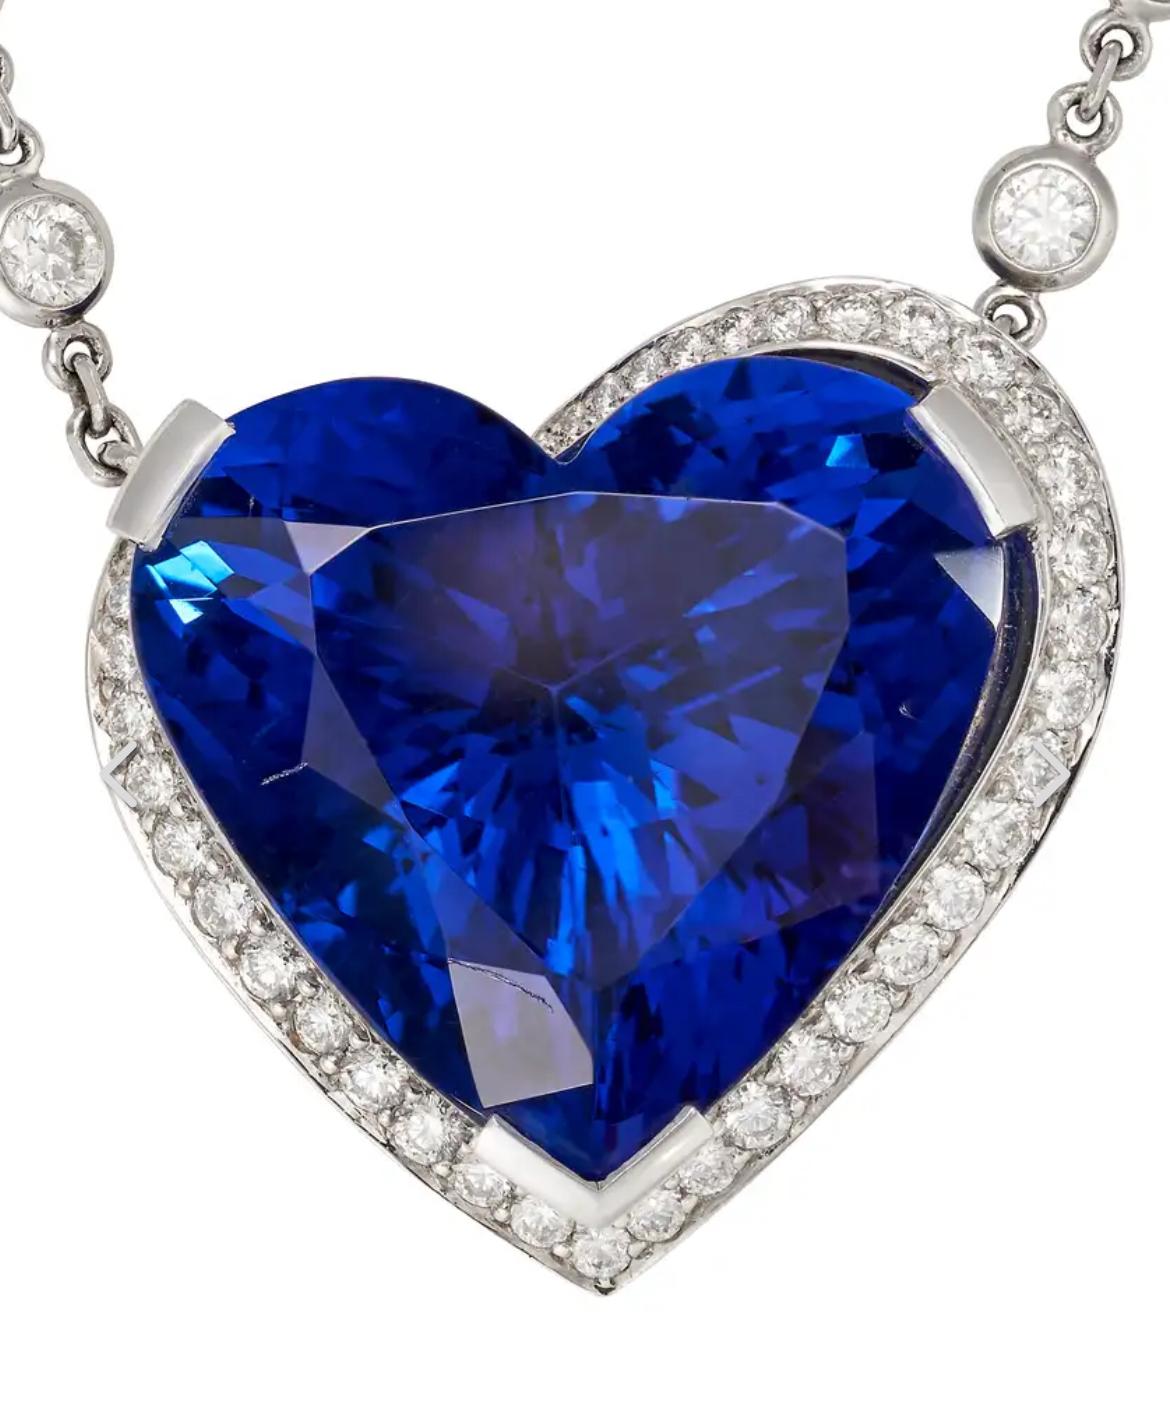 Description
A BEAUTIFUL BOODLES, A TANZANITE AND DIAMOND PENDANT NECKLACE in platinum, set with a heart shaped tanzanite of 31.9 carats in a stylised heart shaped setting pave set with round brilliant cut diamonds, suspended from a chain accented